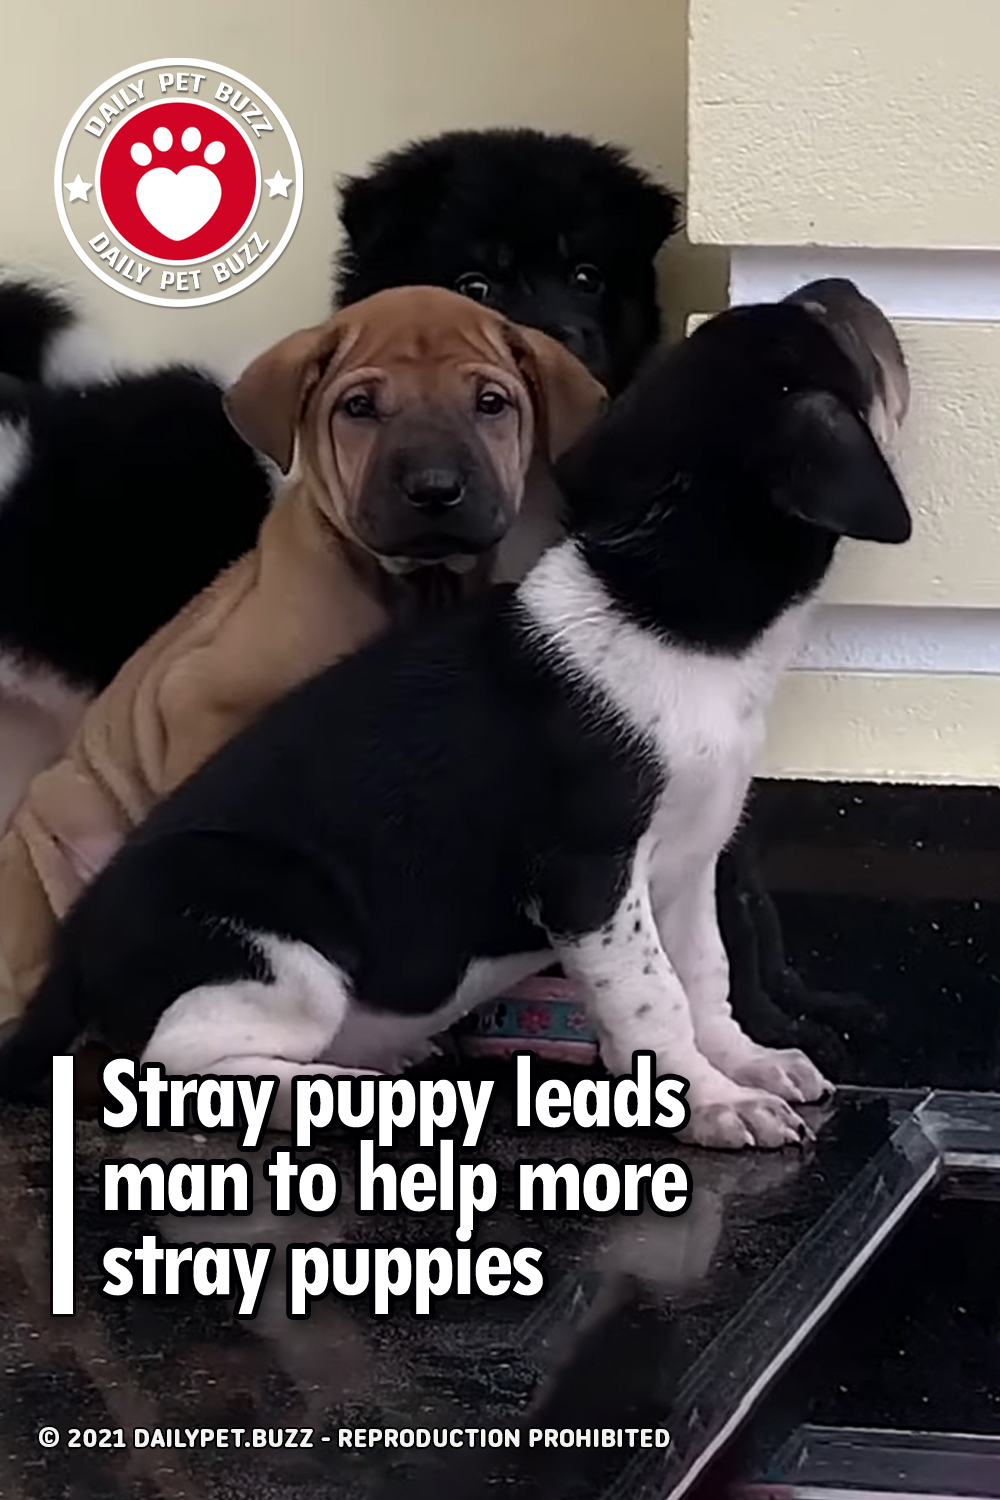 Stray puppy leads man to help more stray puppies